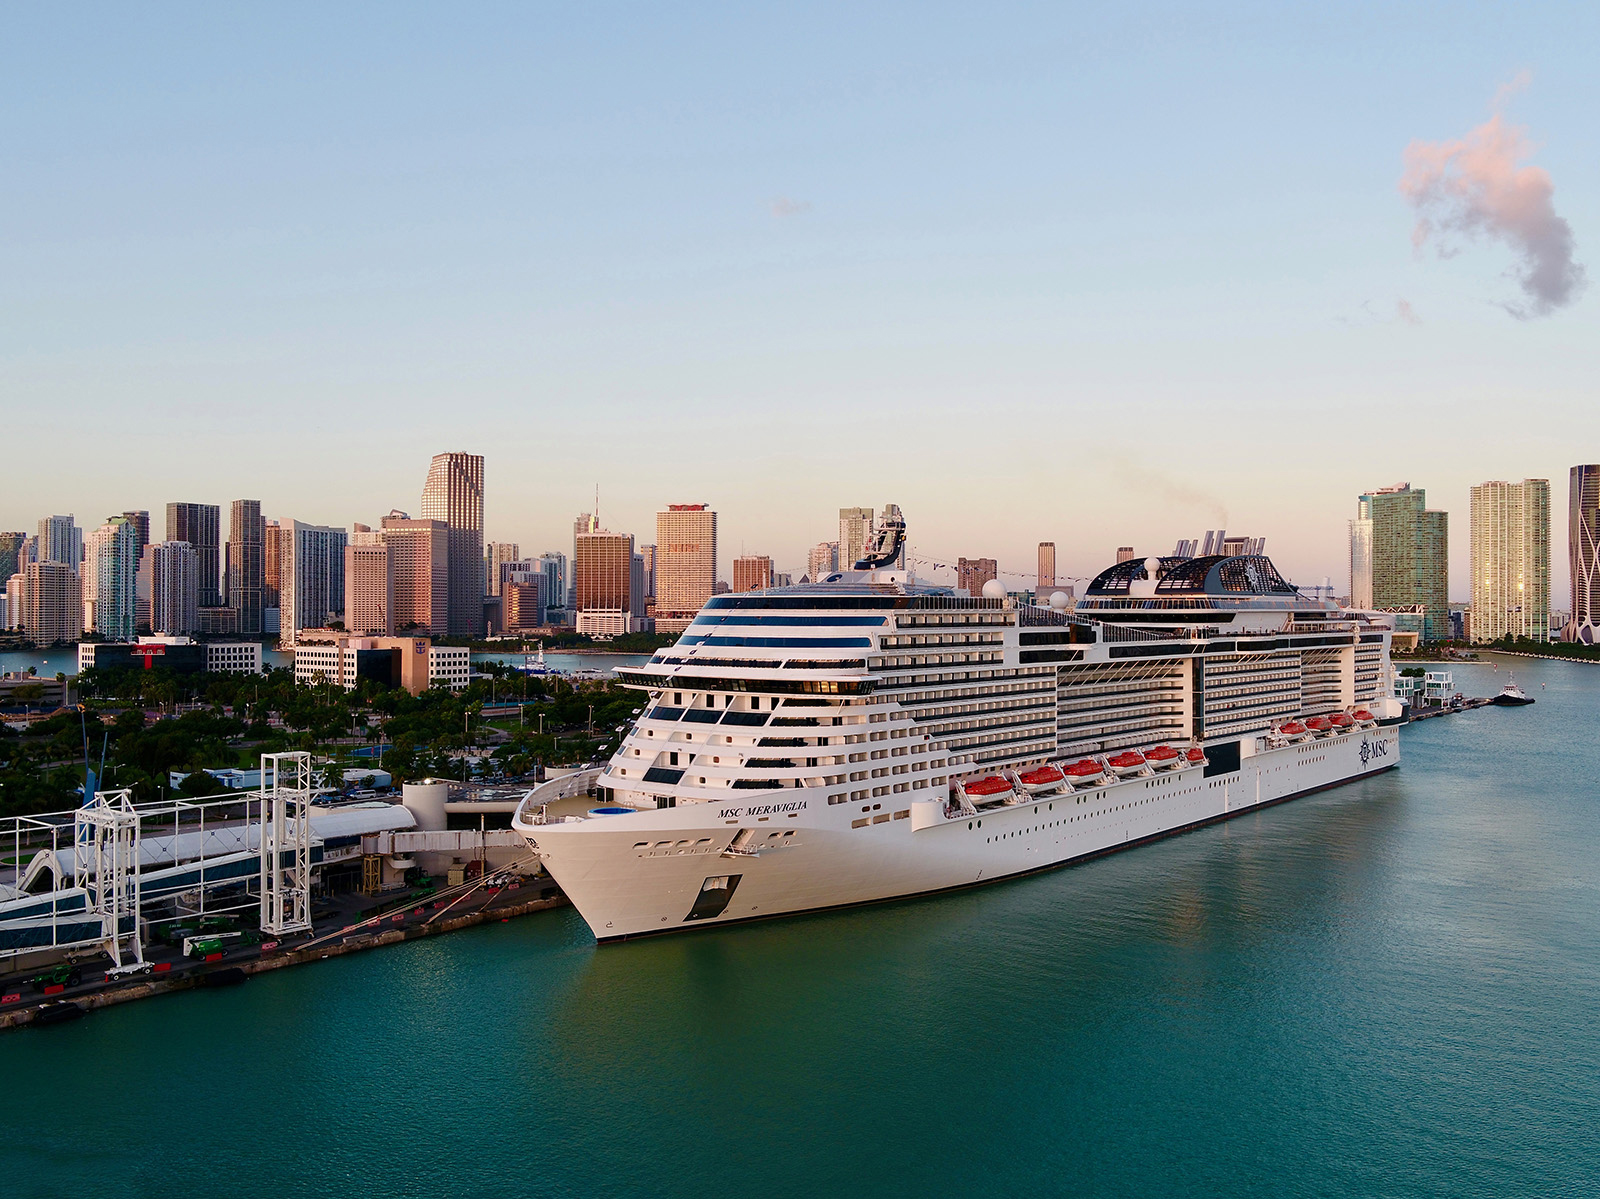 Still waiting on a refund for a canceled cruise? You're not alone